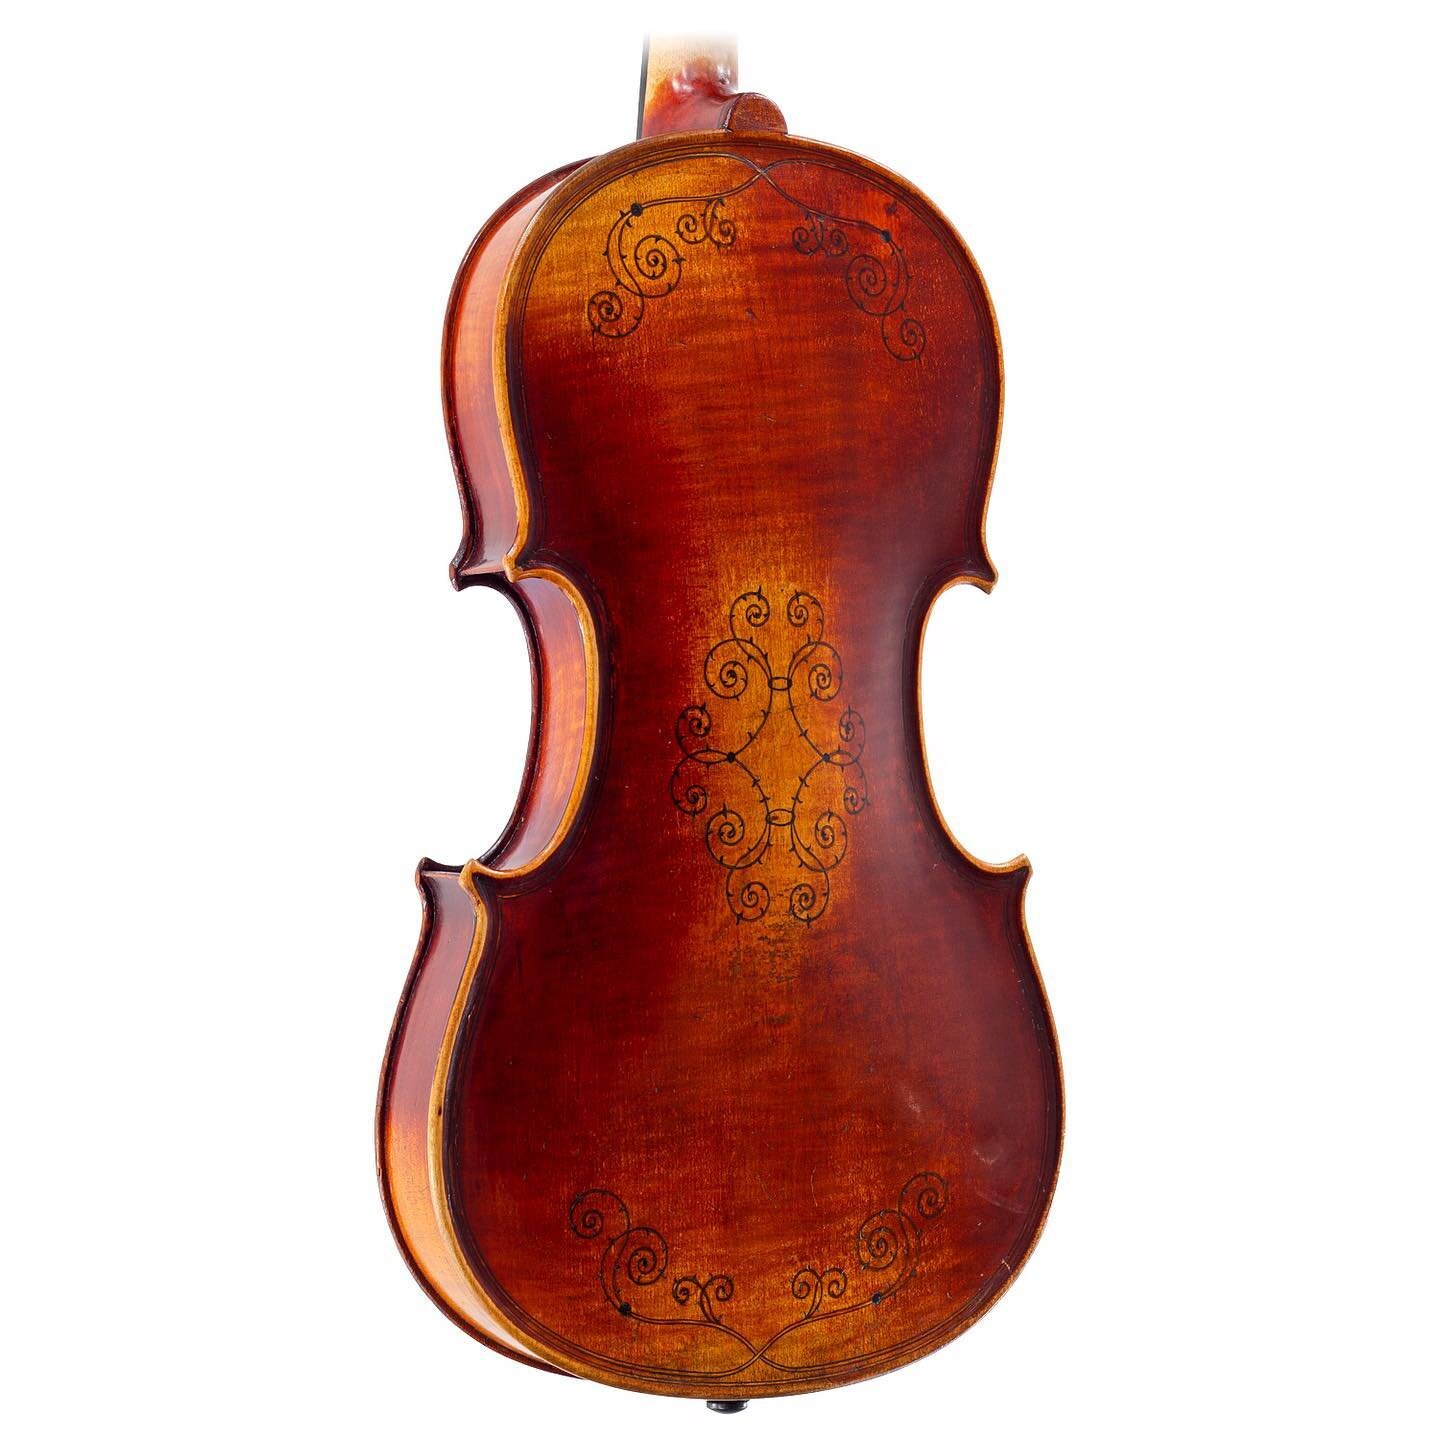 A bit of a marmite violin on the rack today - we&rsquo;re getting mixed opinions on this inlaid Neuner &amp; Hornsteiner violin. What do you think? Come and give it a try if you&rsquo;re a fan.